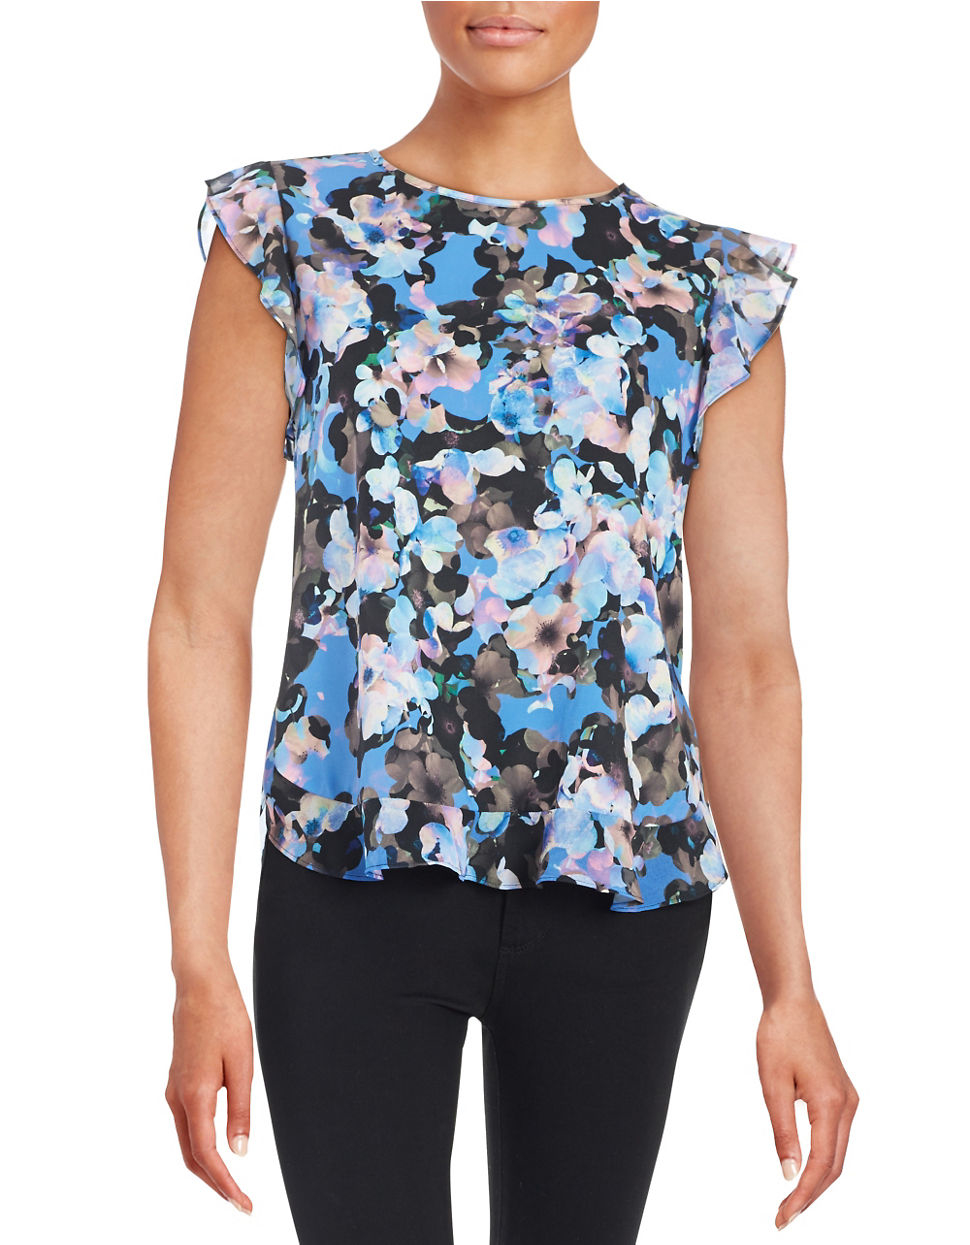 Lyst - Cece By Cynthia Steffe Floral Flutter Blouse in Blue